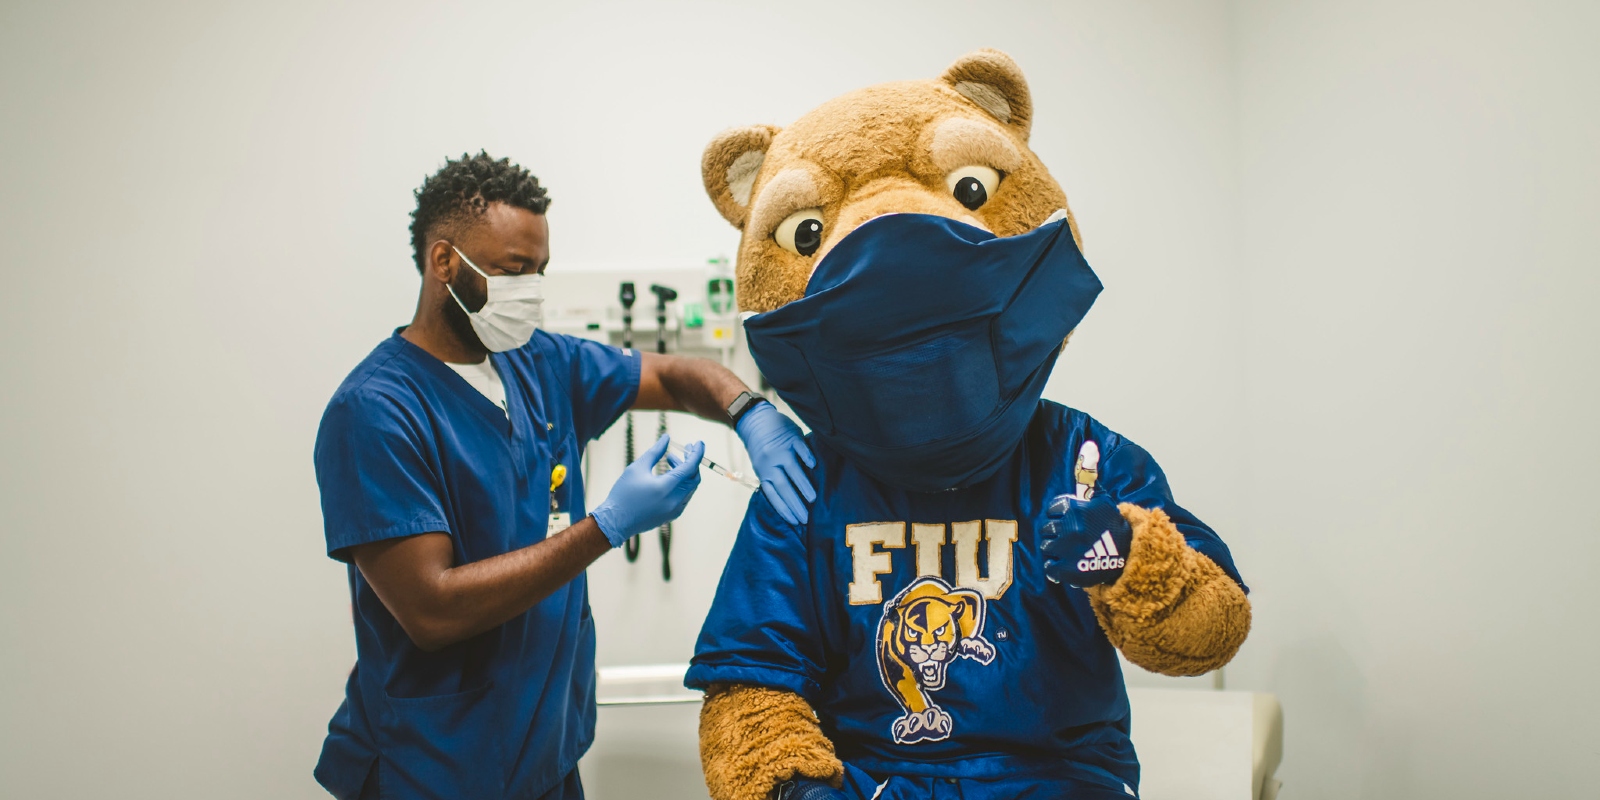 FIU mascot, Roary, getting his vaccination for Covid 19